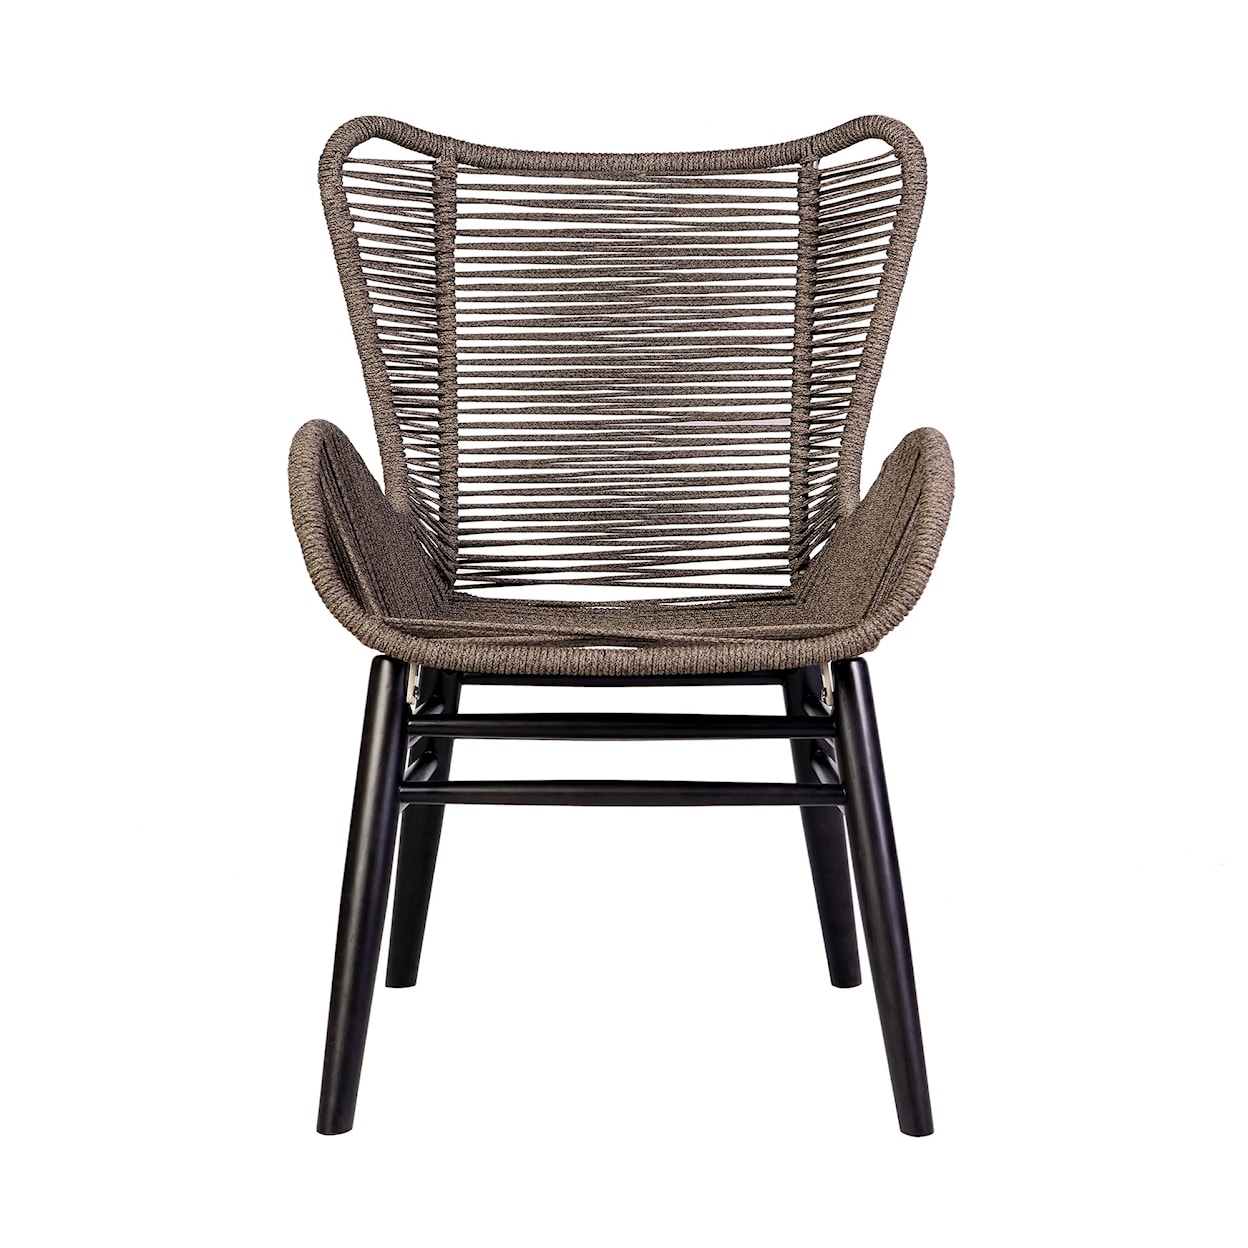 Armen Living Fanny Outdoor Dining Chair